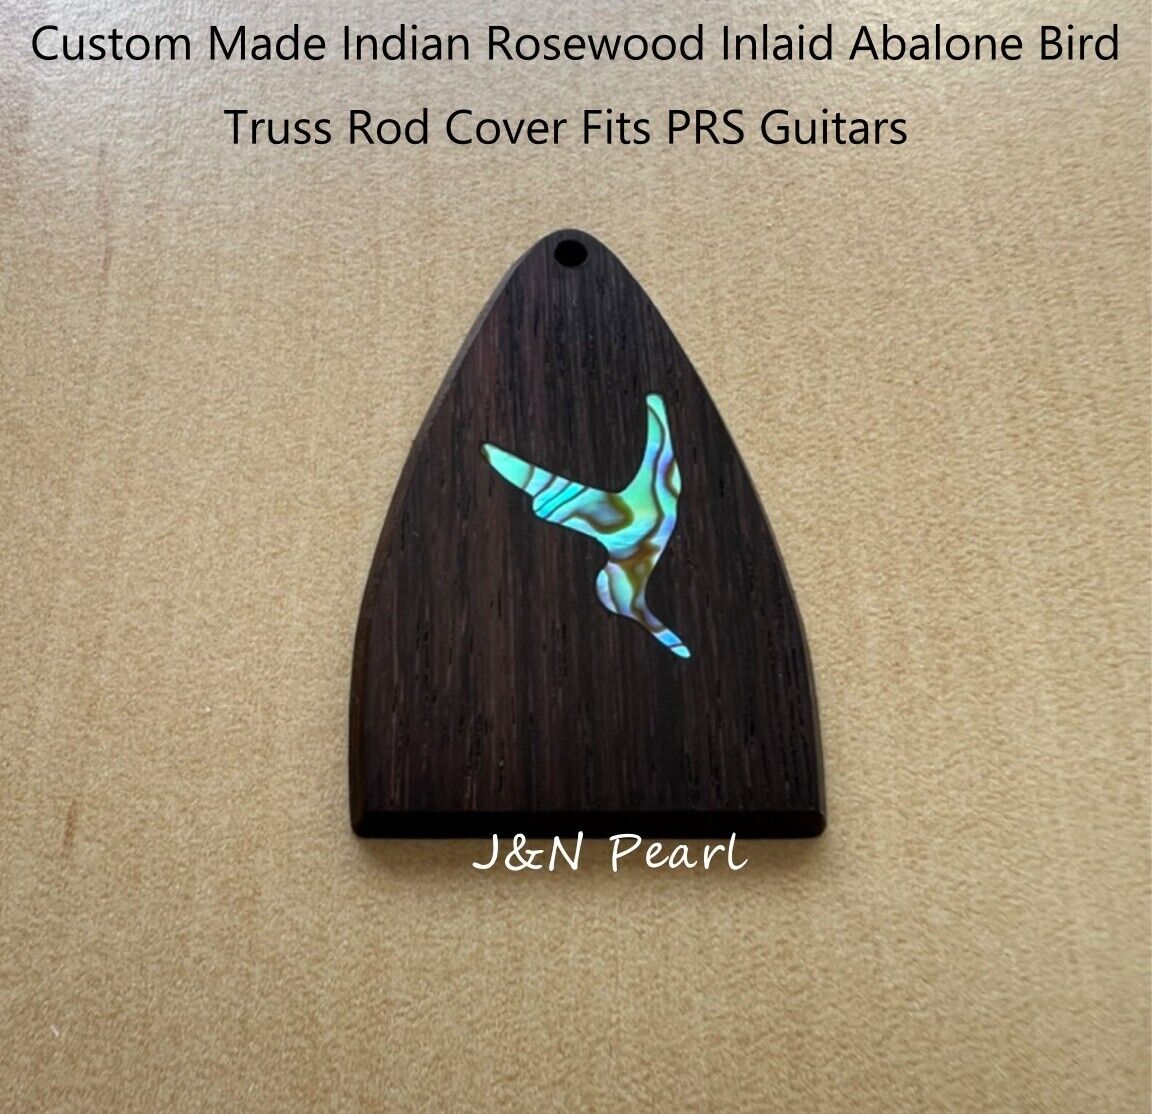 Custom Made Abalone Bird Inlaid Rosewood Truss Rod Cover Fits PRS Guitars,1pc